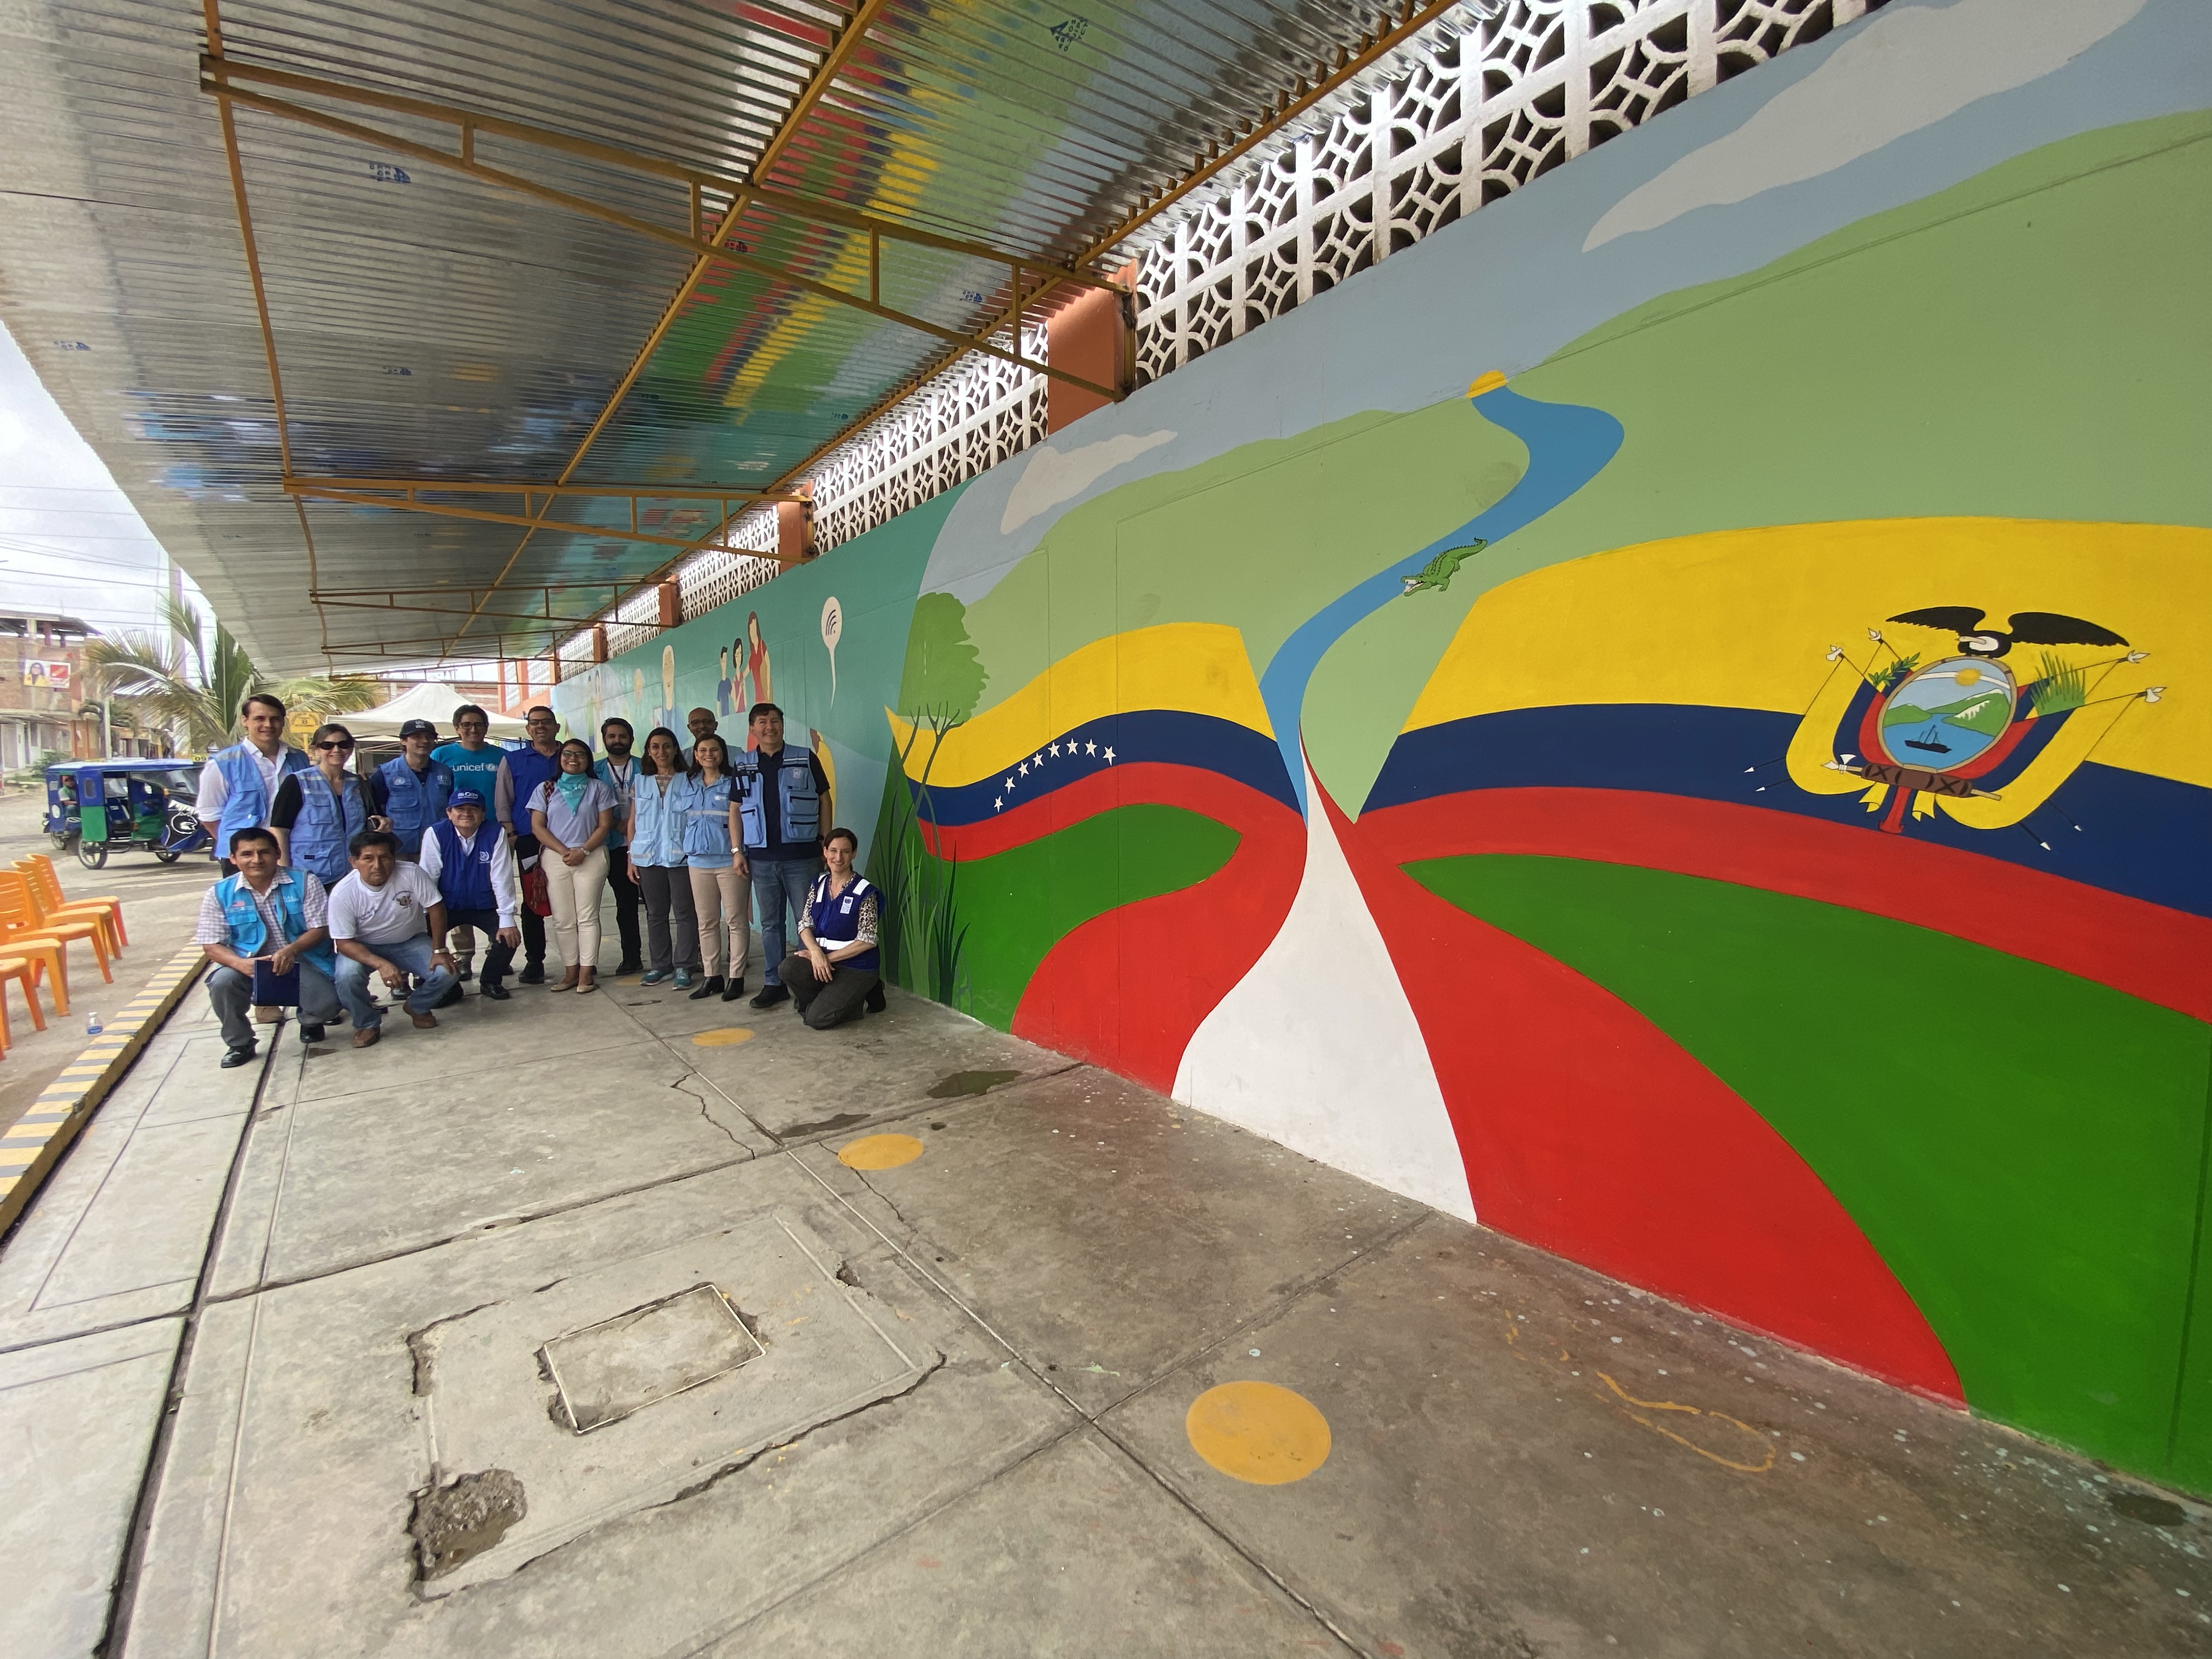 A group of people pose next to a painted wall 